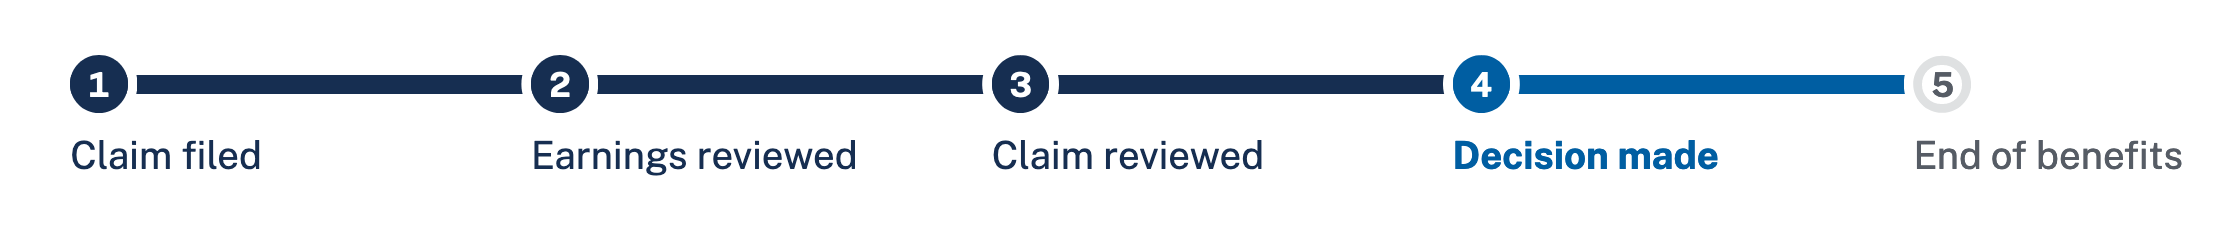 Screenshot of example step indicator with these completed steps: 1) File claim 2) Earnings review 3) Claim in review and this step in progress: 4) Decision made and this step incompleted: 5) End of benefits